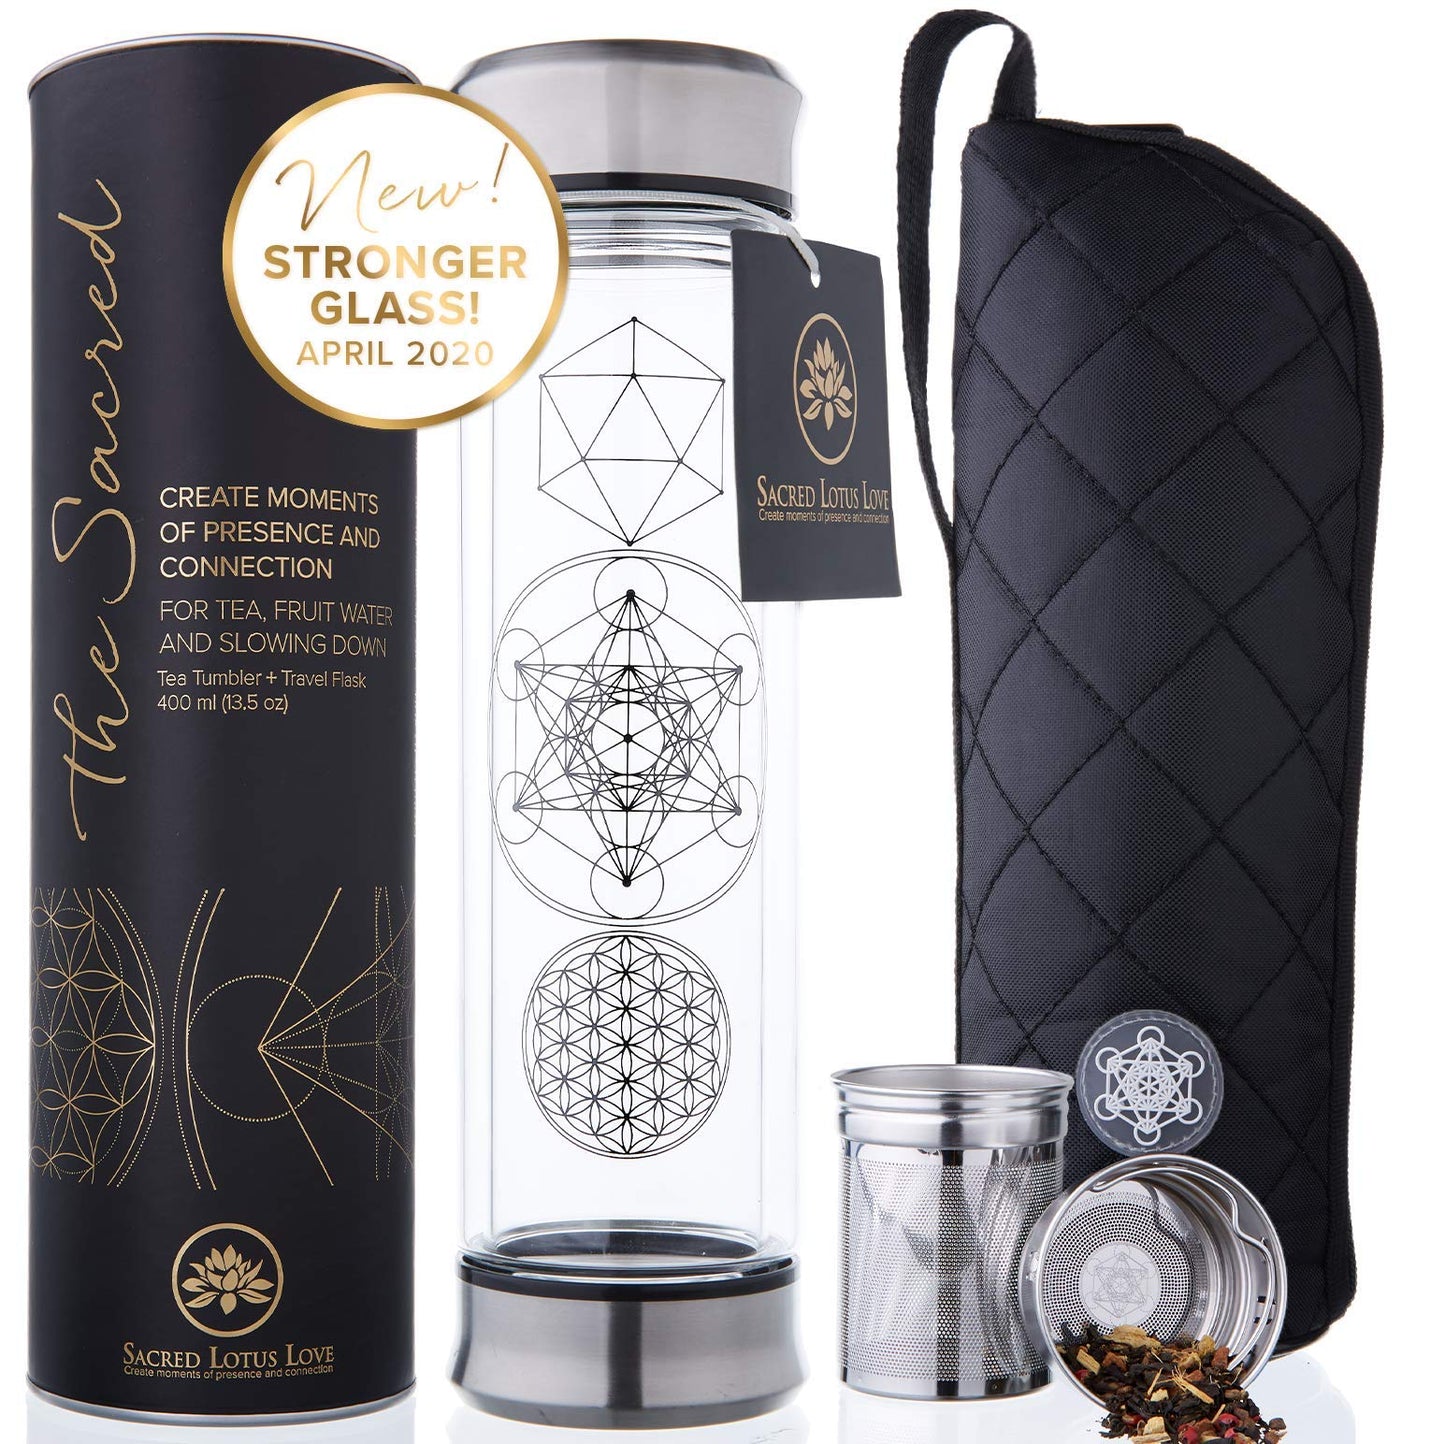 Portable Travel Mug with Strainer and Sleeve for Loose Leaf Tea, Coffee, Smoothies - Insulated Tumbler with Lid for Hot and Iced Beverages